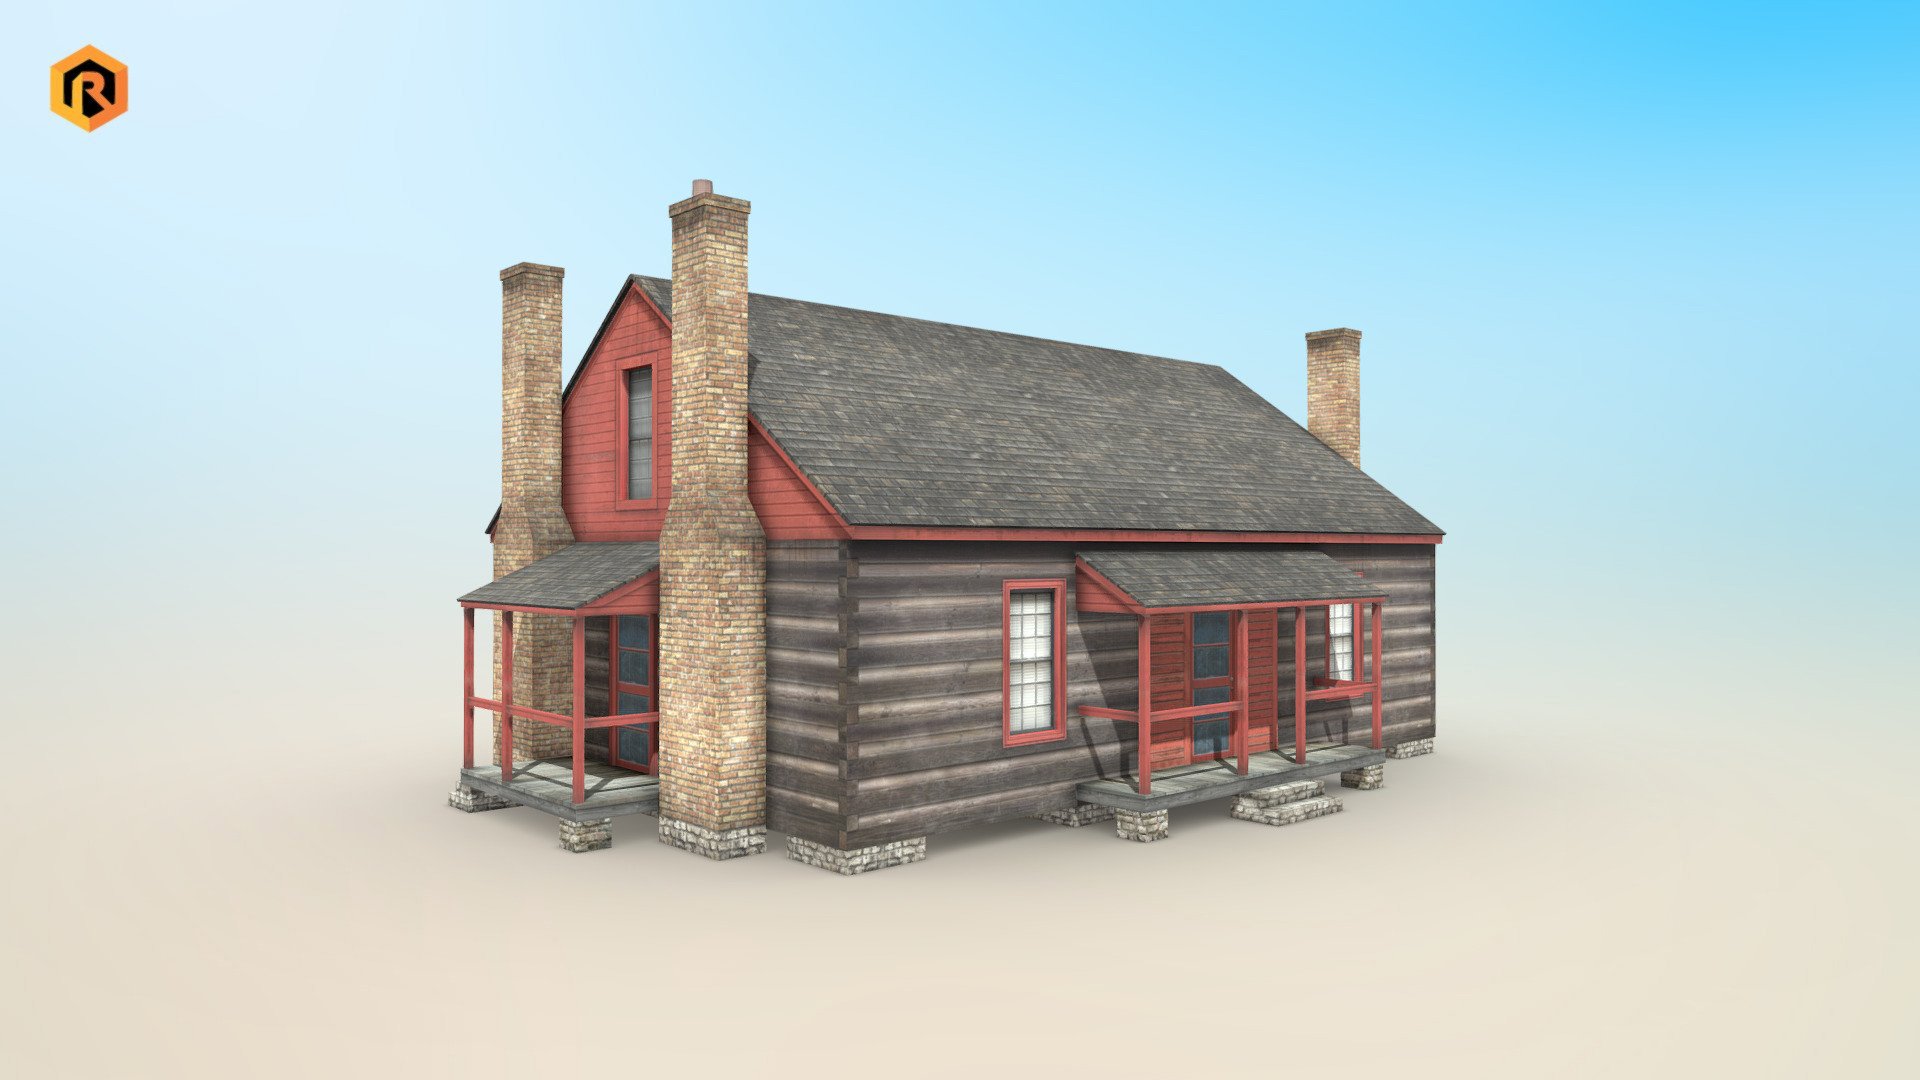 Low-poly 3D model of Wooden House Building.

It is best for use in games and other VR / AR, real-time applications such as Unity or Unreal Engine. It can also be rendered in Blender (ex Cycles) or Vray as the model is equipped with proper textures.   

You can also get this model in a bundle: https://skfb.ly/ovQJB

Technical details:

- 2048 x 2048 Diffuse and AO textures

- 790 Triangles

- 571 Vertices

- Model is one mesh

- Model completely unwrapped

- All nodes, materials and textures are appropriately named

- Lot of additional file formats included (Blender, Unity, Maya etc.)  

More file formats are available in additional zip file on product page.

Please feel free to contact me if you have any questions or need any support for this asset.

Support e-mail: support@rescue3d.com - Wooden House Building - Download Free 3D model by Rescue3D Assets (@rescue3d) 3d model